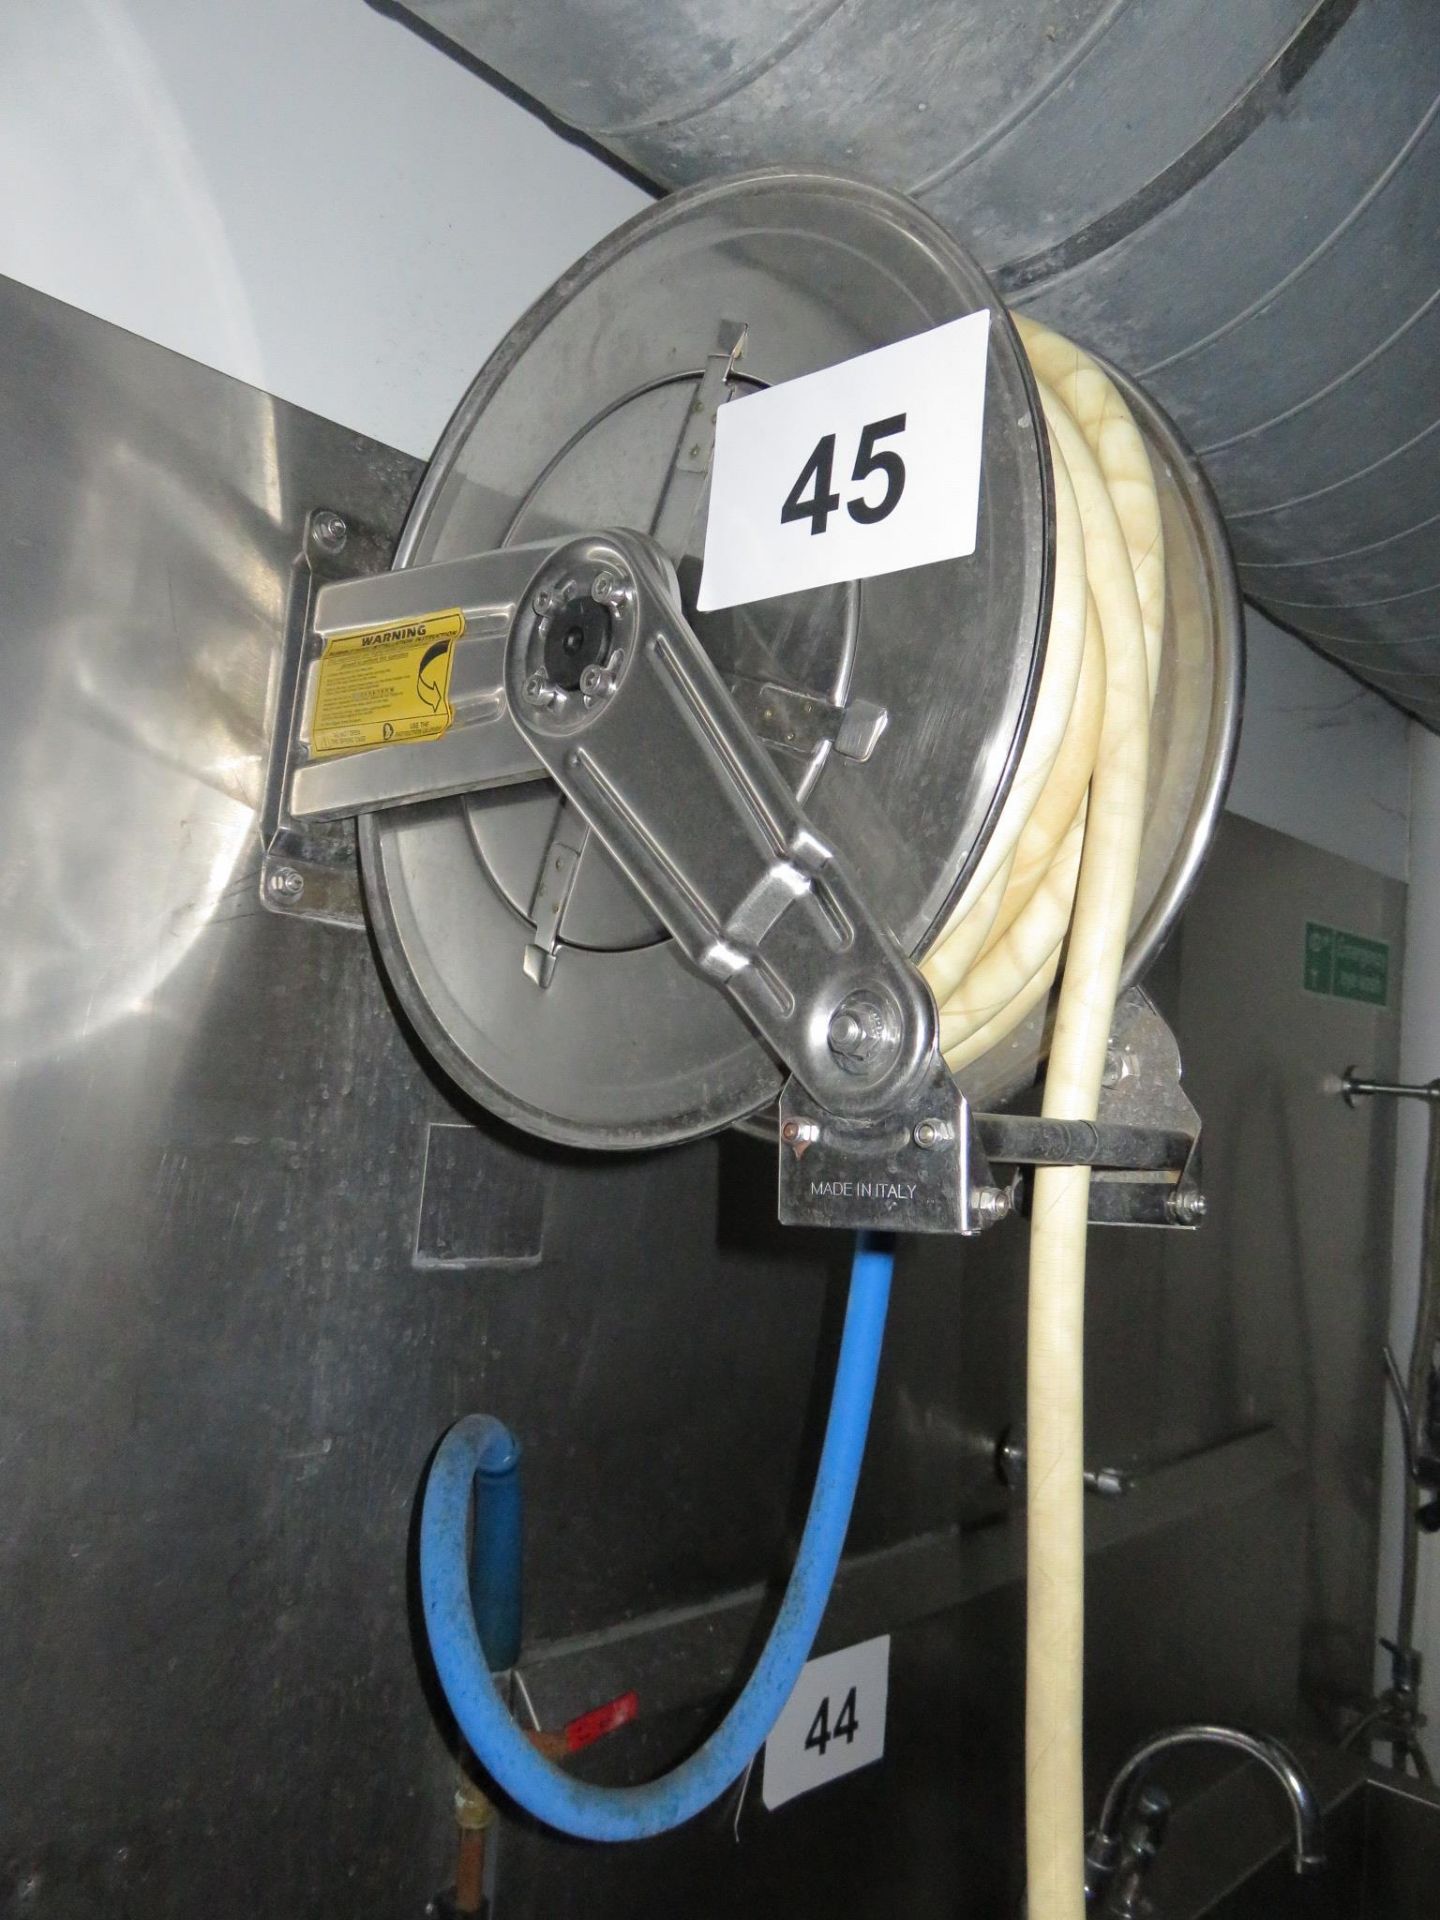 WALL MOUNTED S/S HOSE REEL.